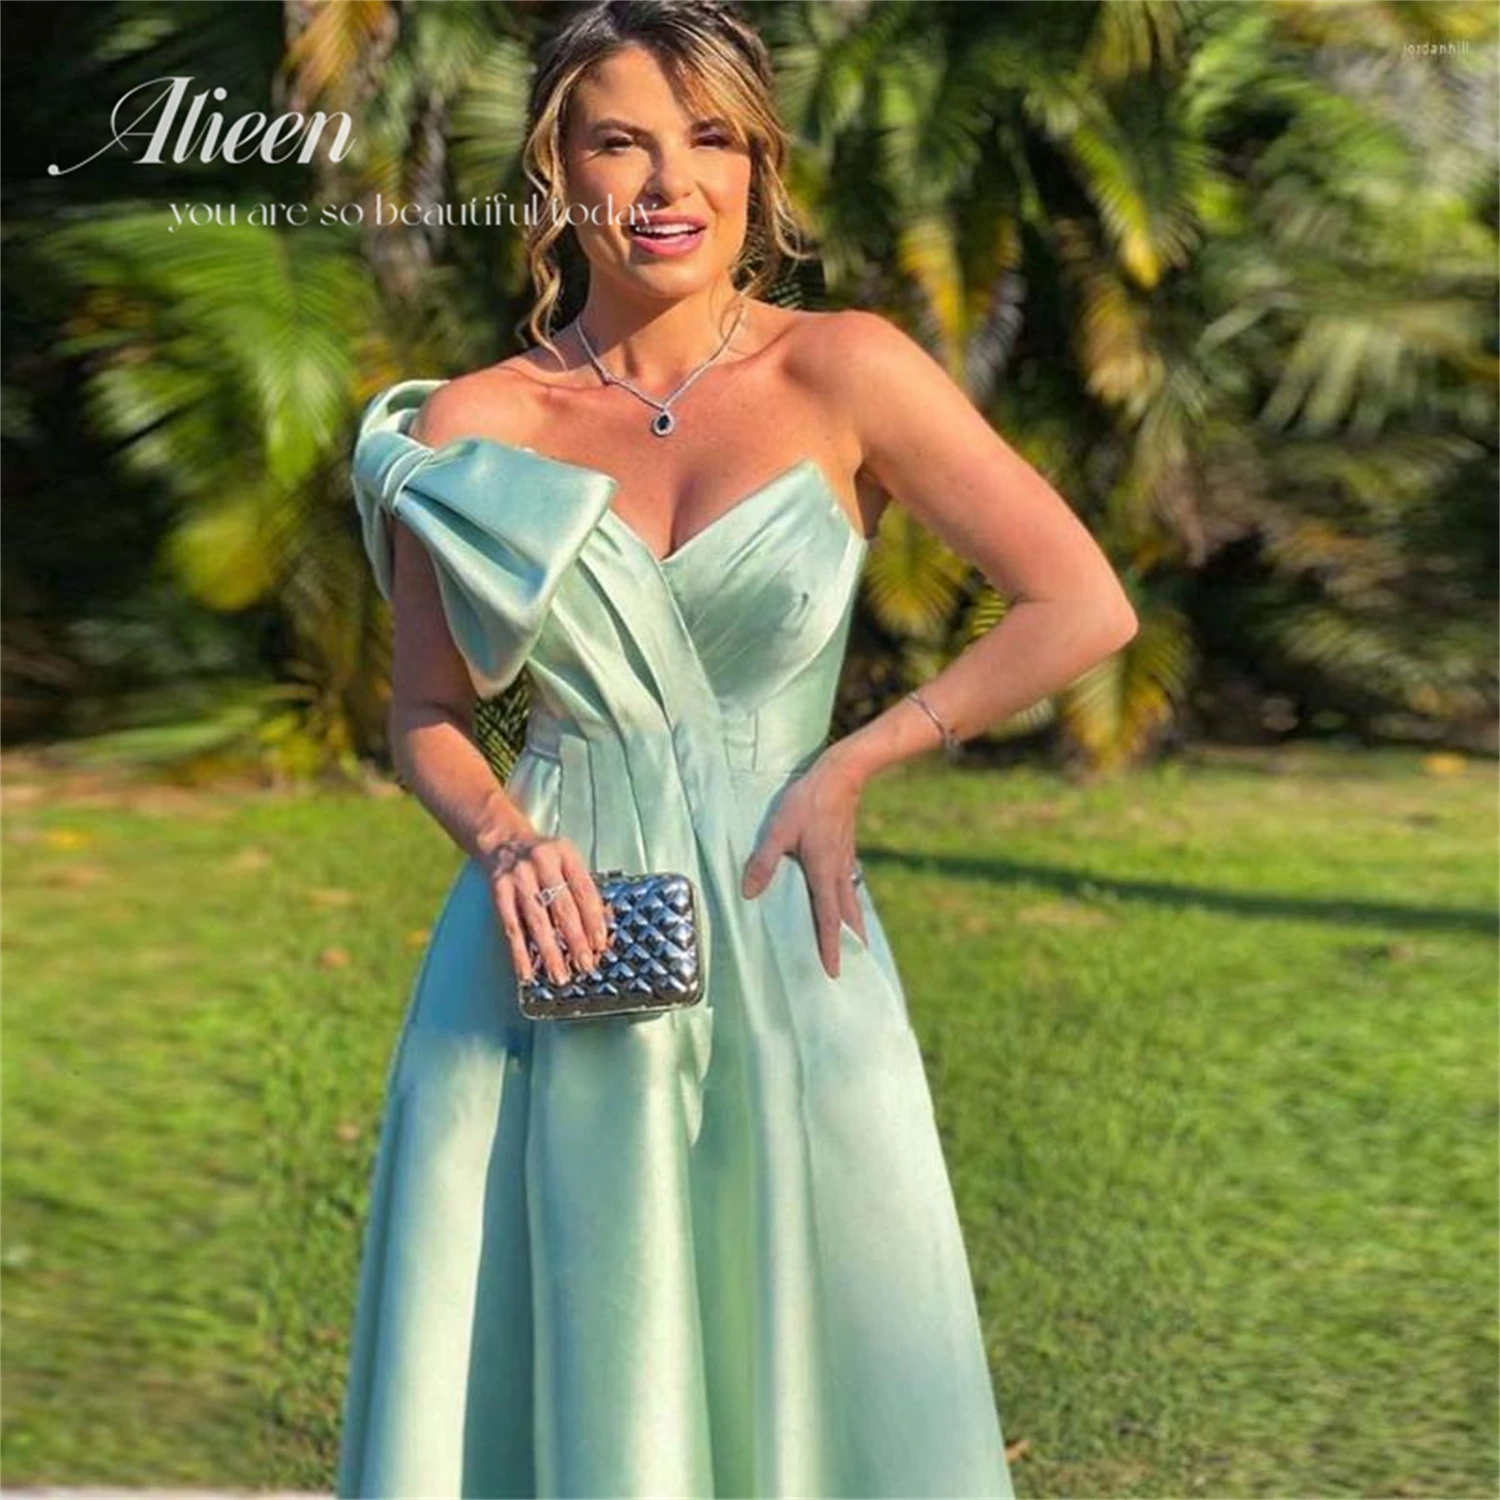 

Sweetheart Long Party Dresses for Prom Green Satin Women Evening Dress Ladies Aileen Skirt Ball Gown Robe Bridesmaid Dress Woman